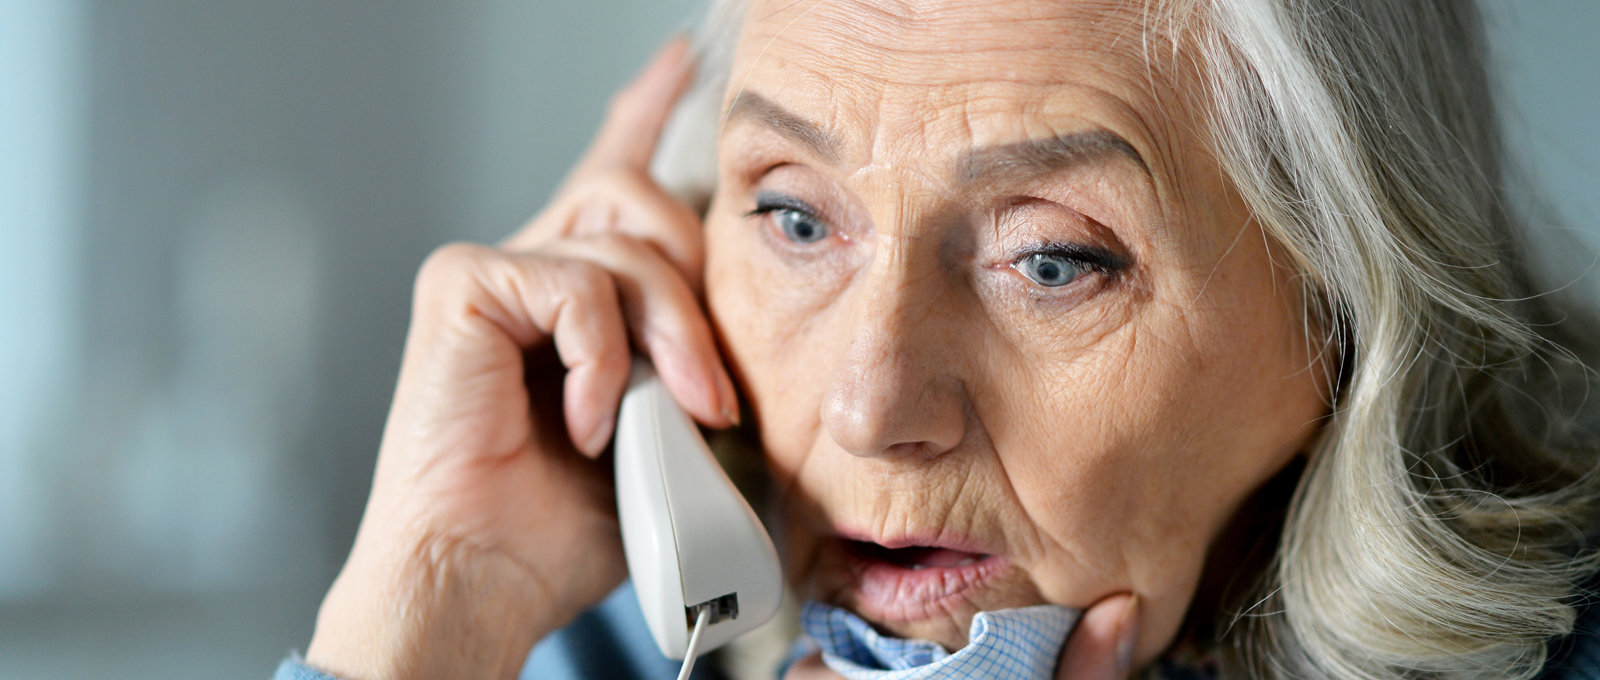 Close up photograph of the face of an older woman on the phone and looking stressed or shocked